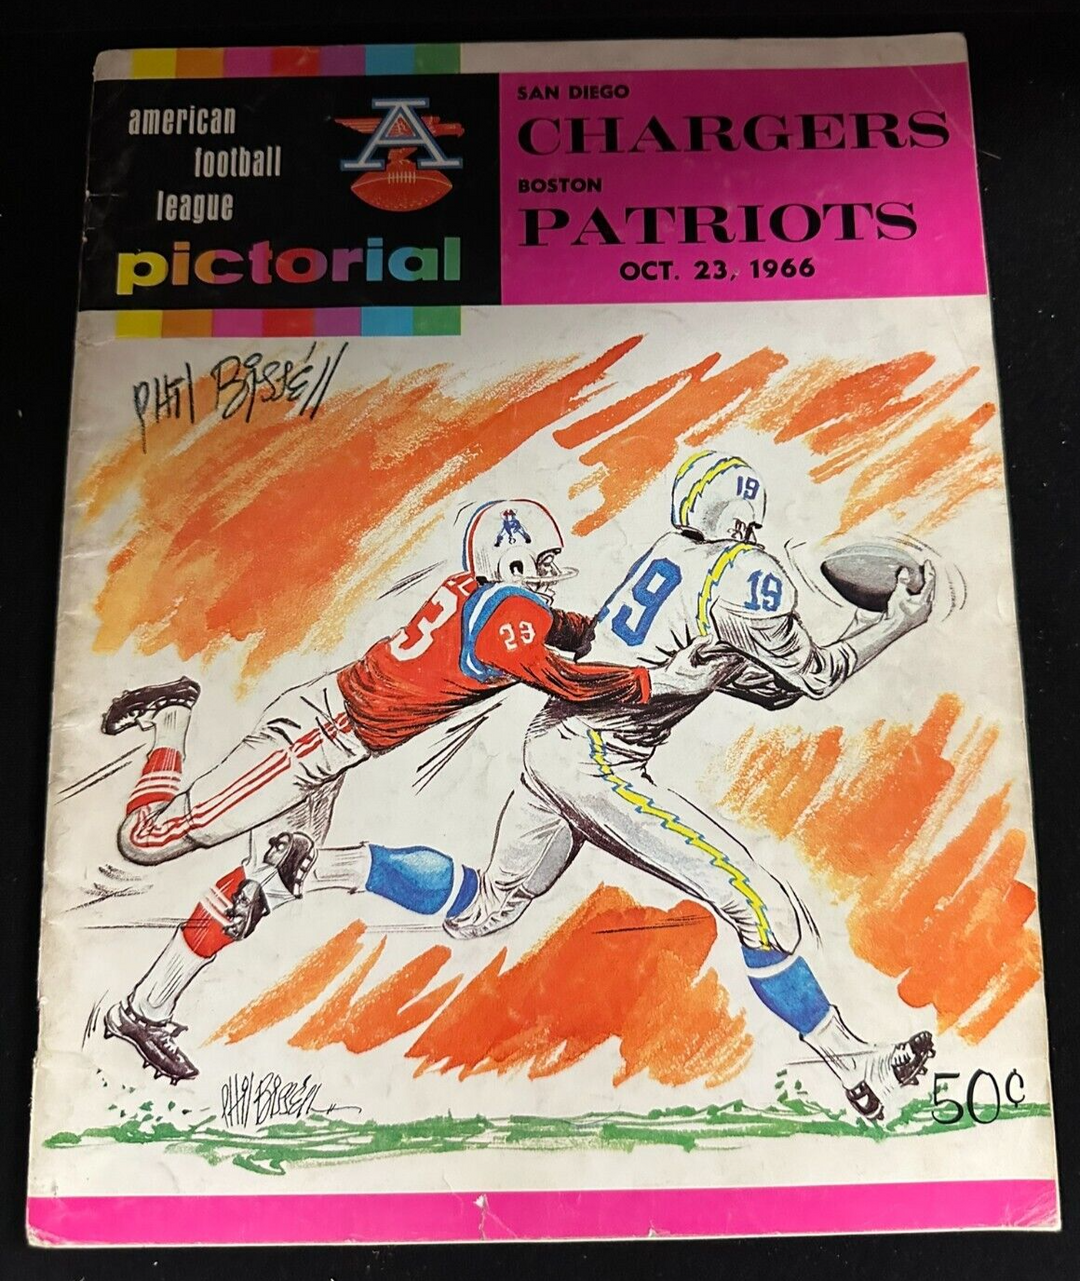 Phil Bissell Autographed Oct 23, 1966 Boston Patriots Vs Chargers Program AFL